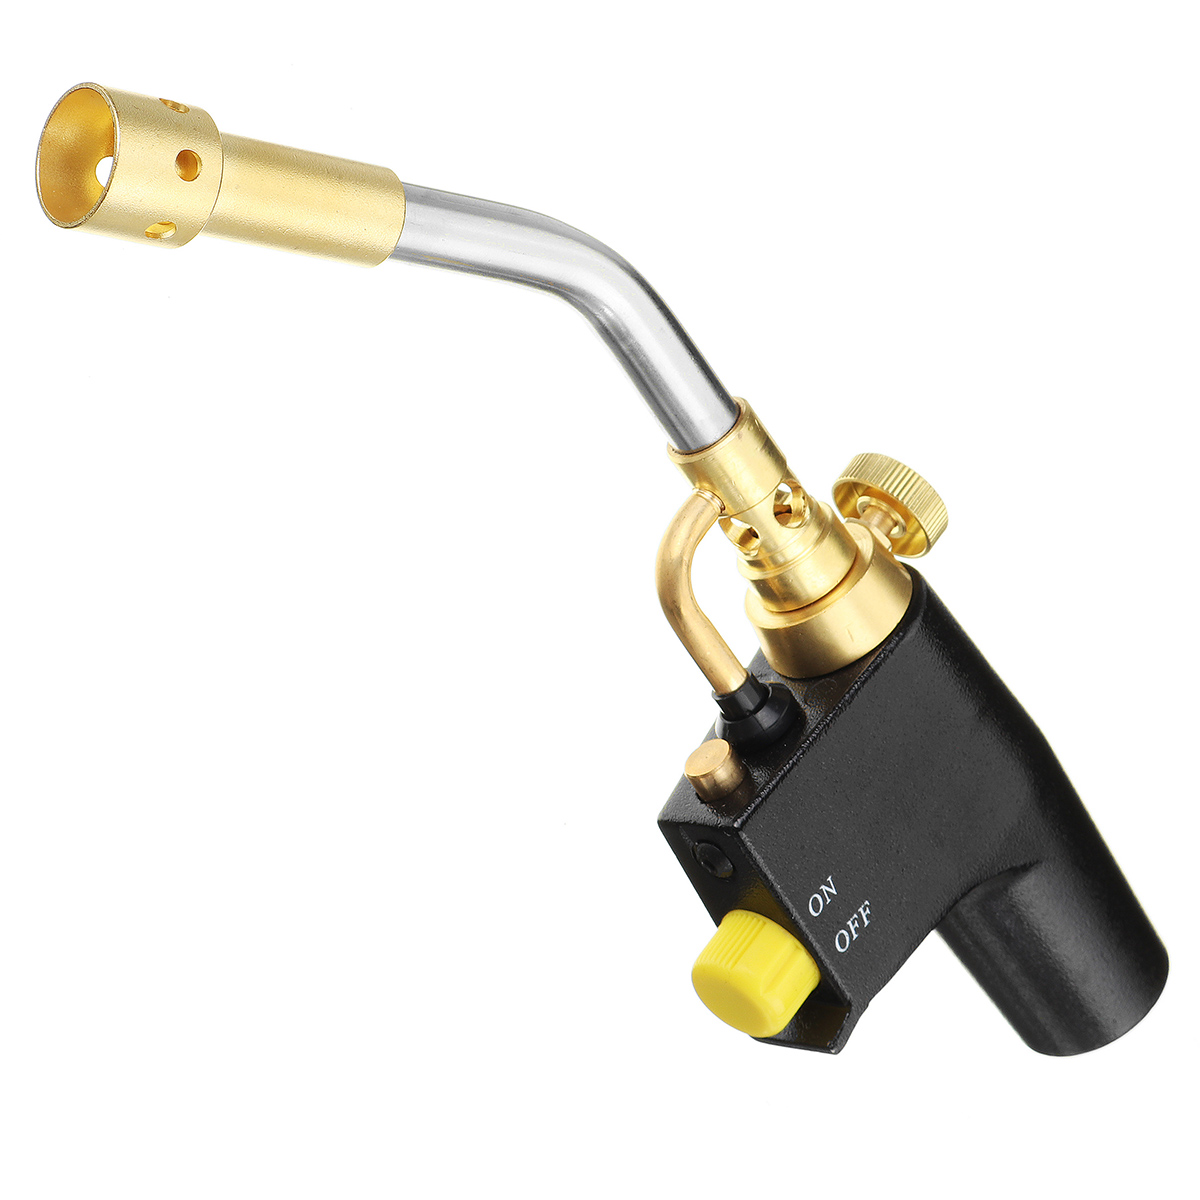 TS8000-Type-High-Temperature-Brass-Mapp-Gas-Torch-Propane-Welding-Pipe-With-a-Replaceable-Brass-Weld-1717065-5